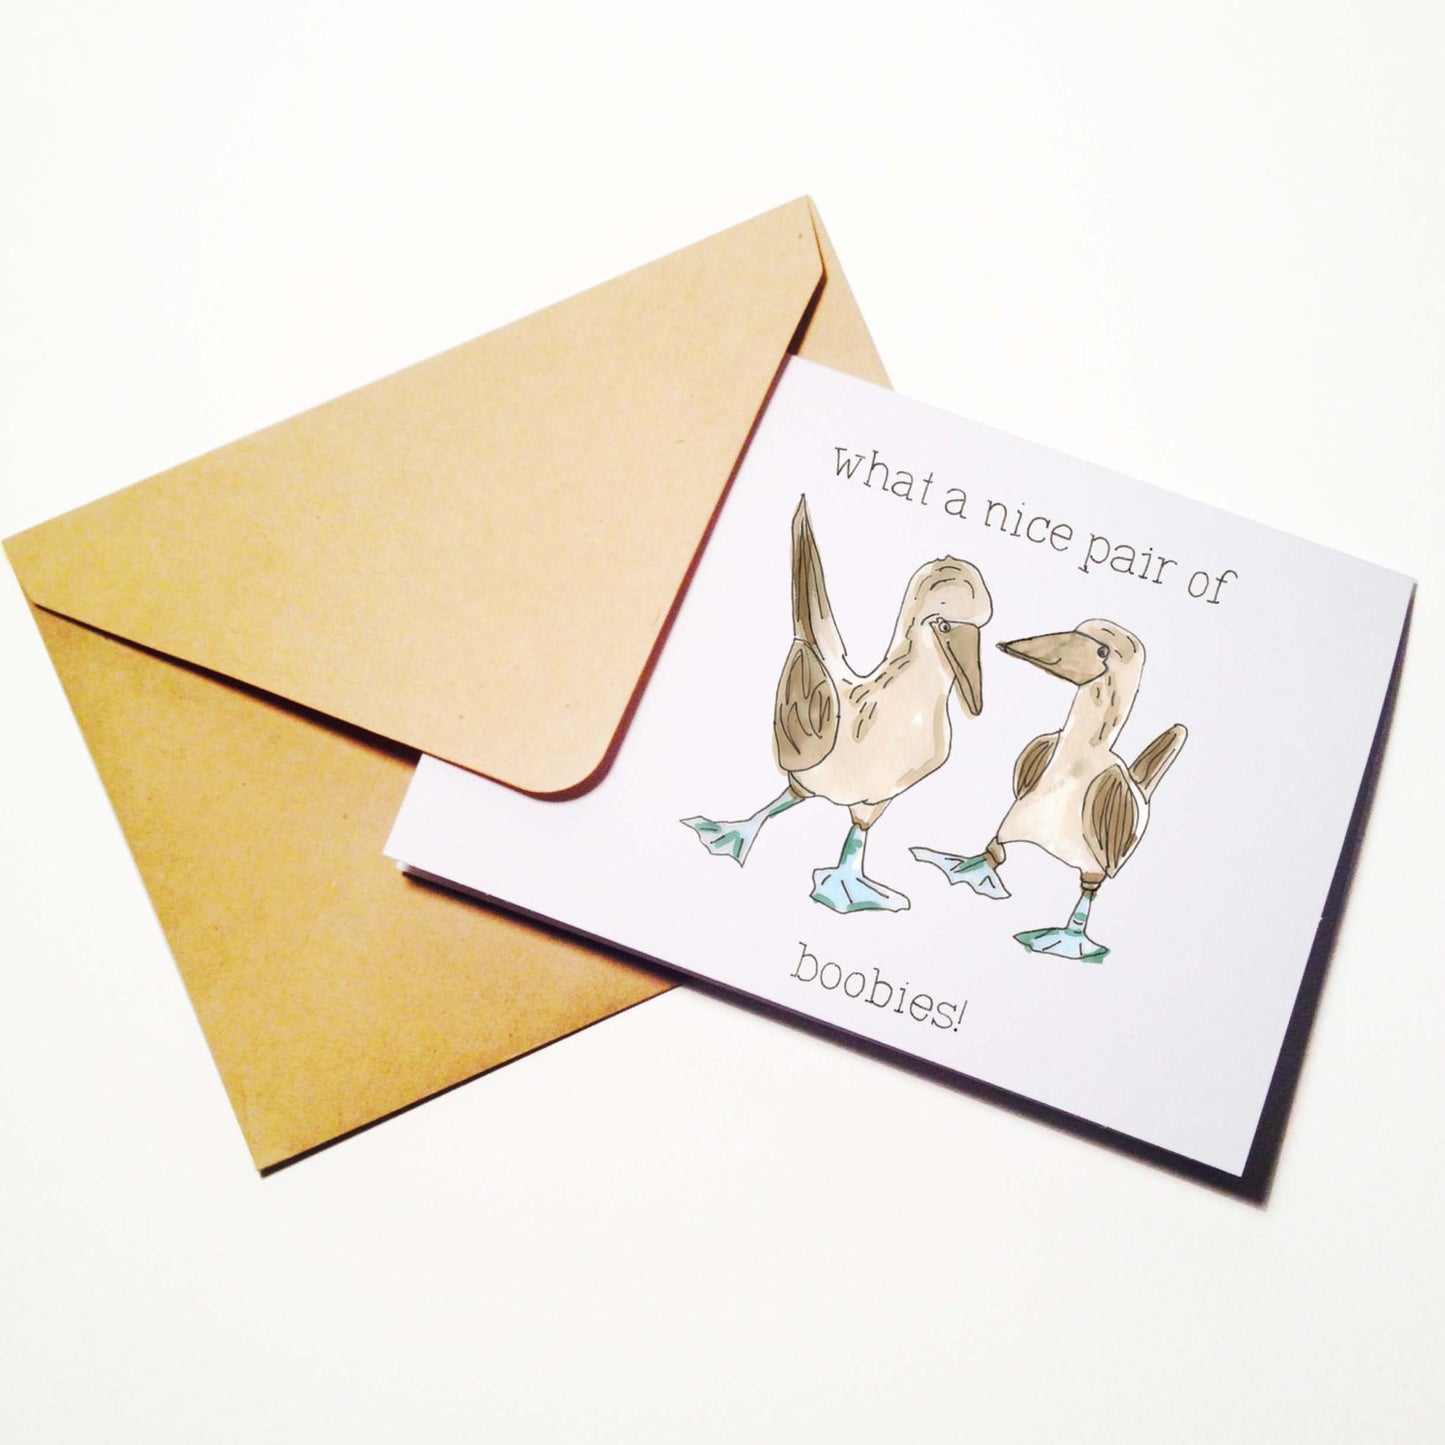 Blue Footed Boobies Humor and Just Because Card